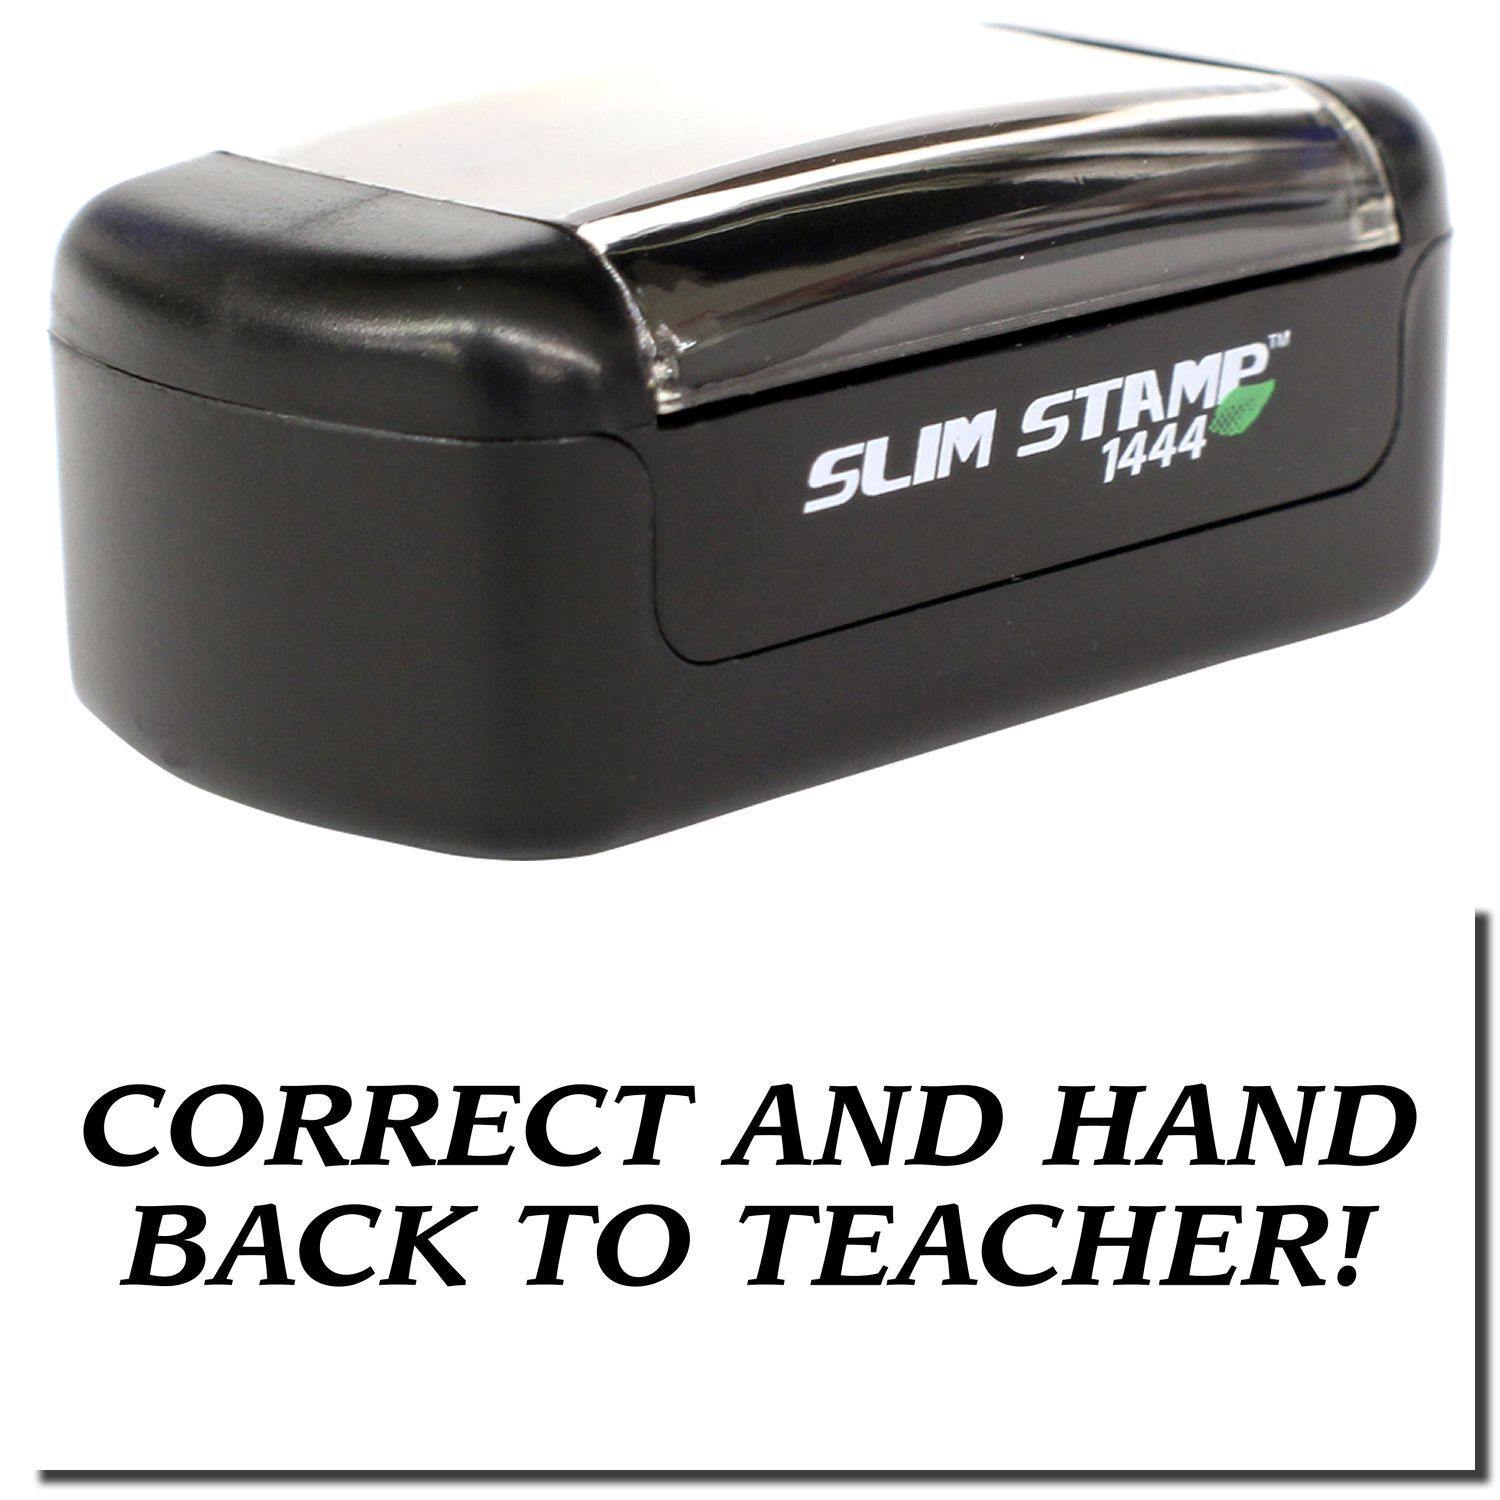 A stock office pre-inked stamp with a stamped image showing how the text "CORRECT AND HAND BACK TO TEACHER!" is displayed after stamping.